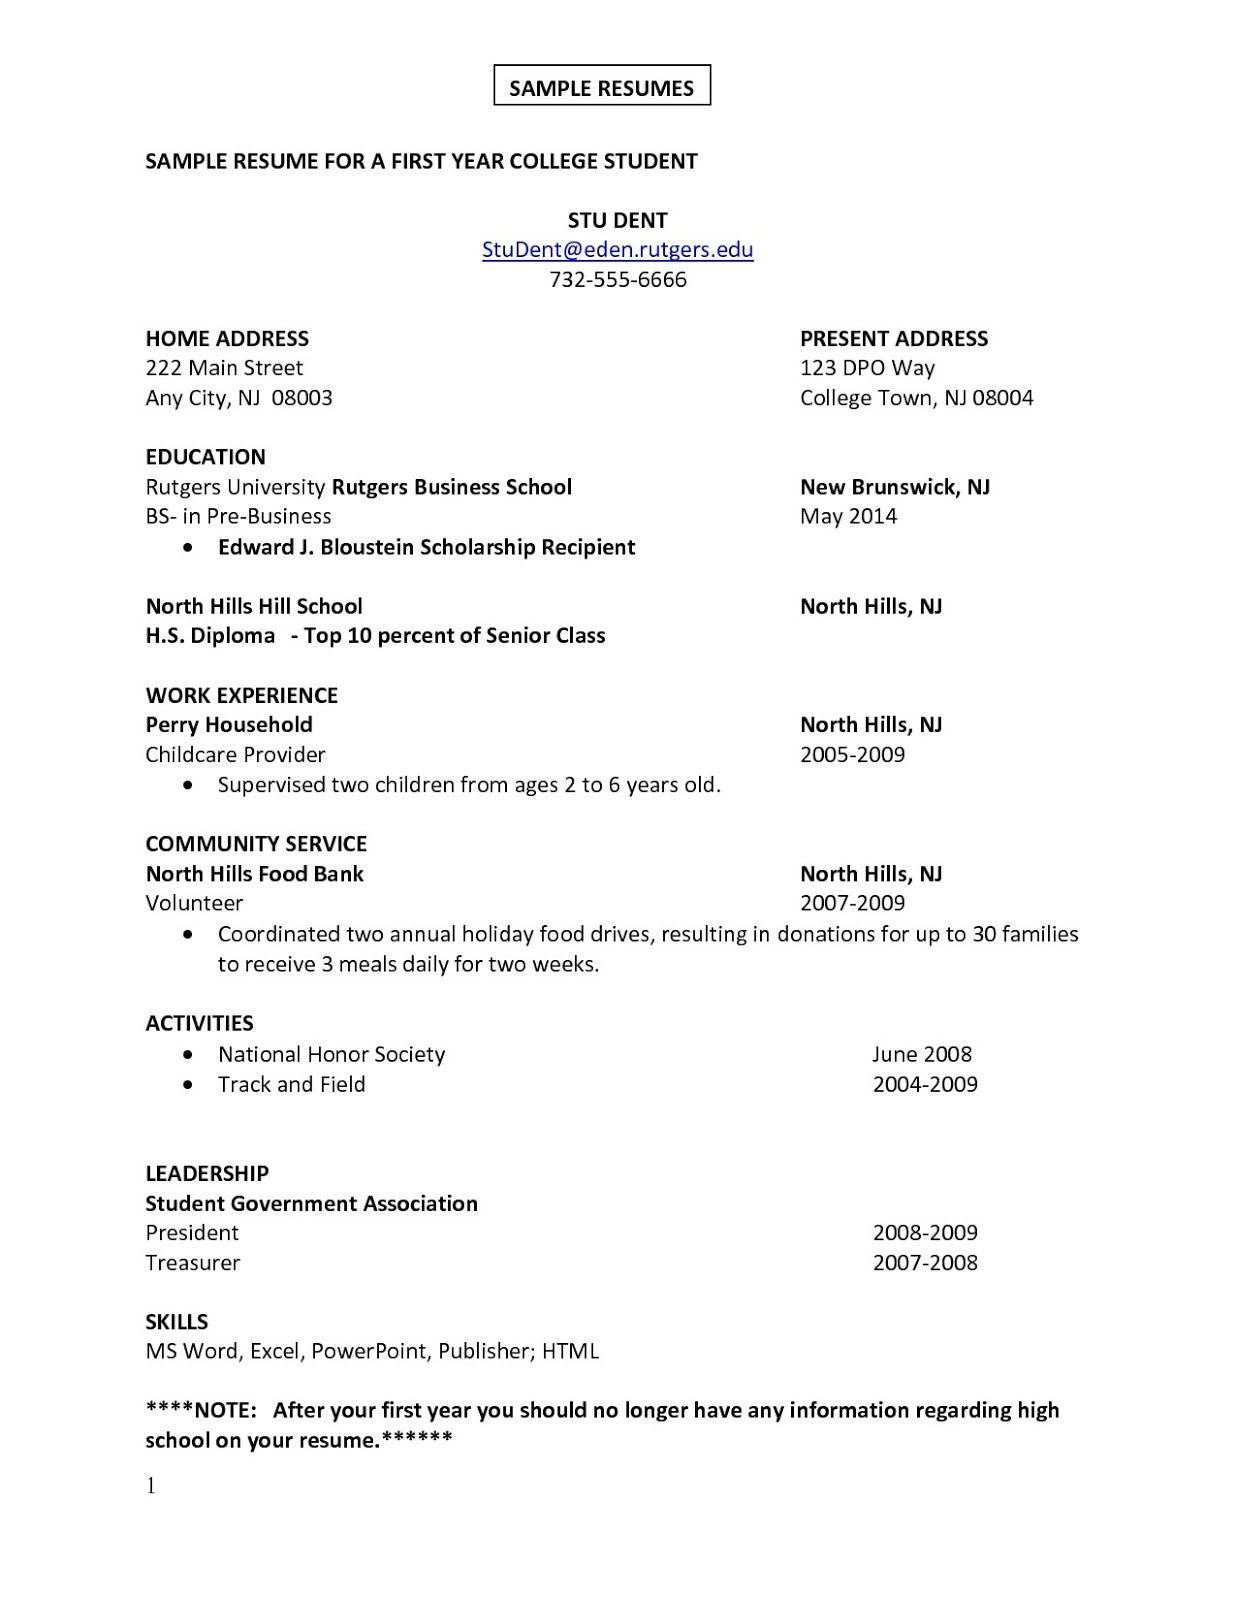 Resume for First Job for Students Sample First Job Sample Resume Sample Resumes First Job Resume, Cover …